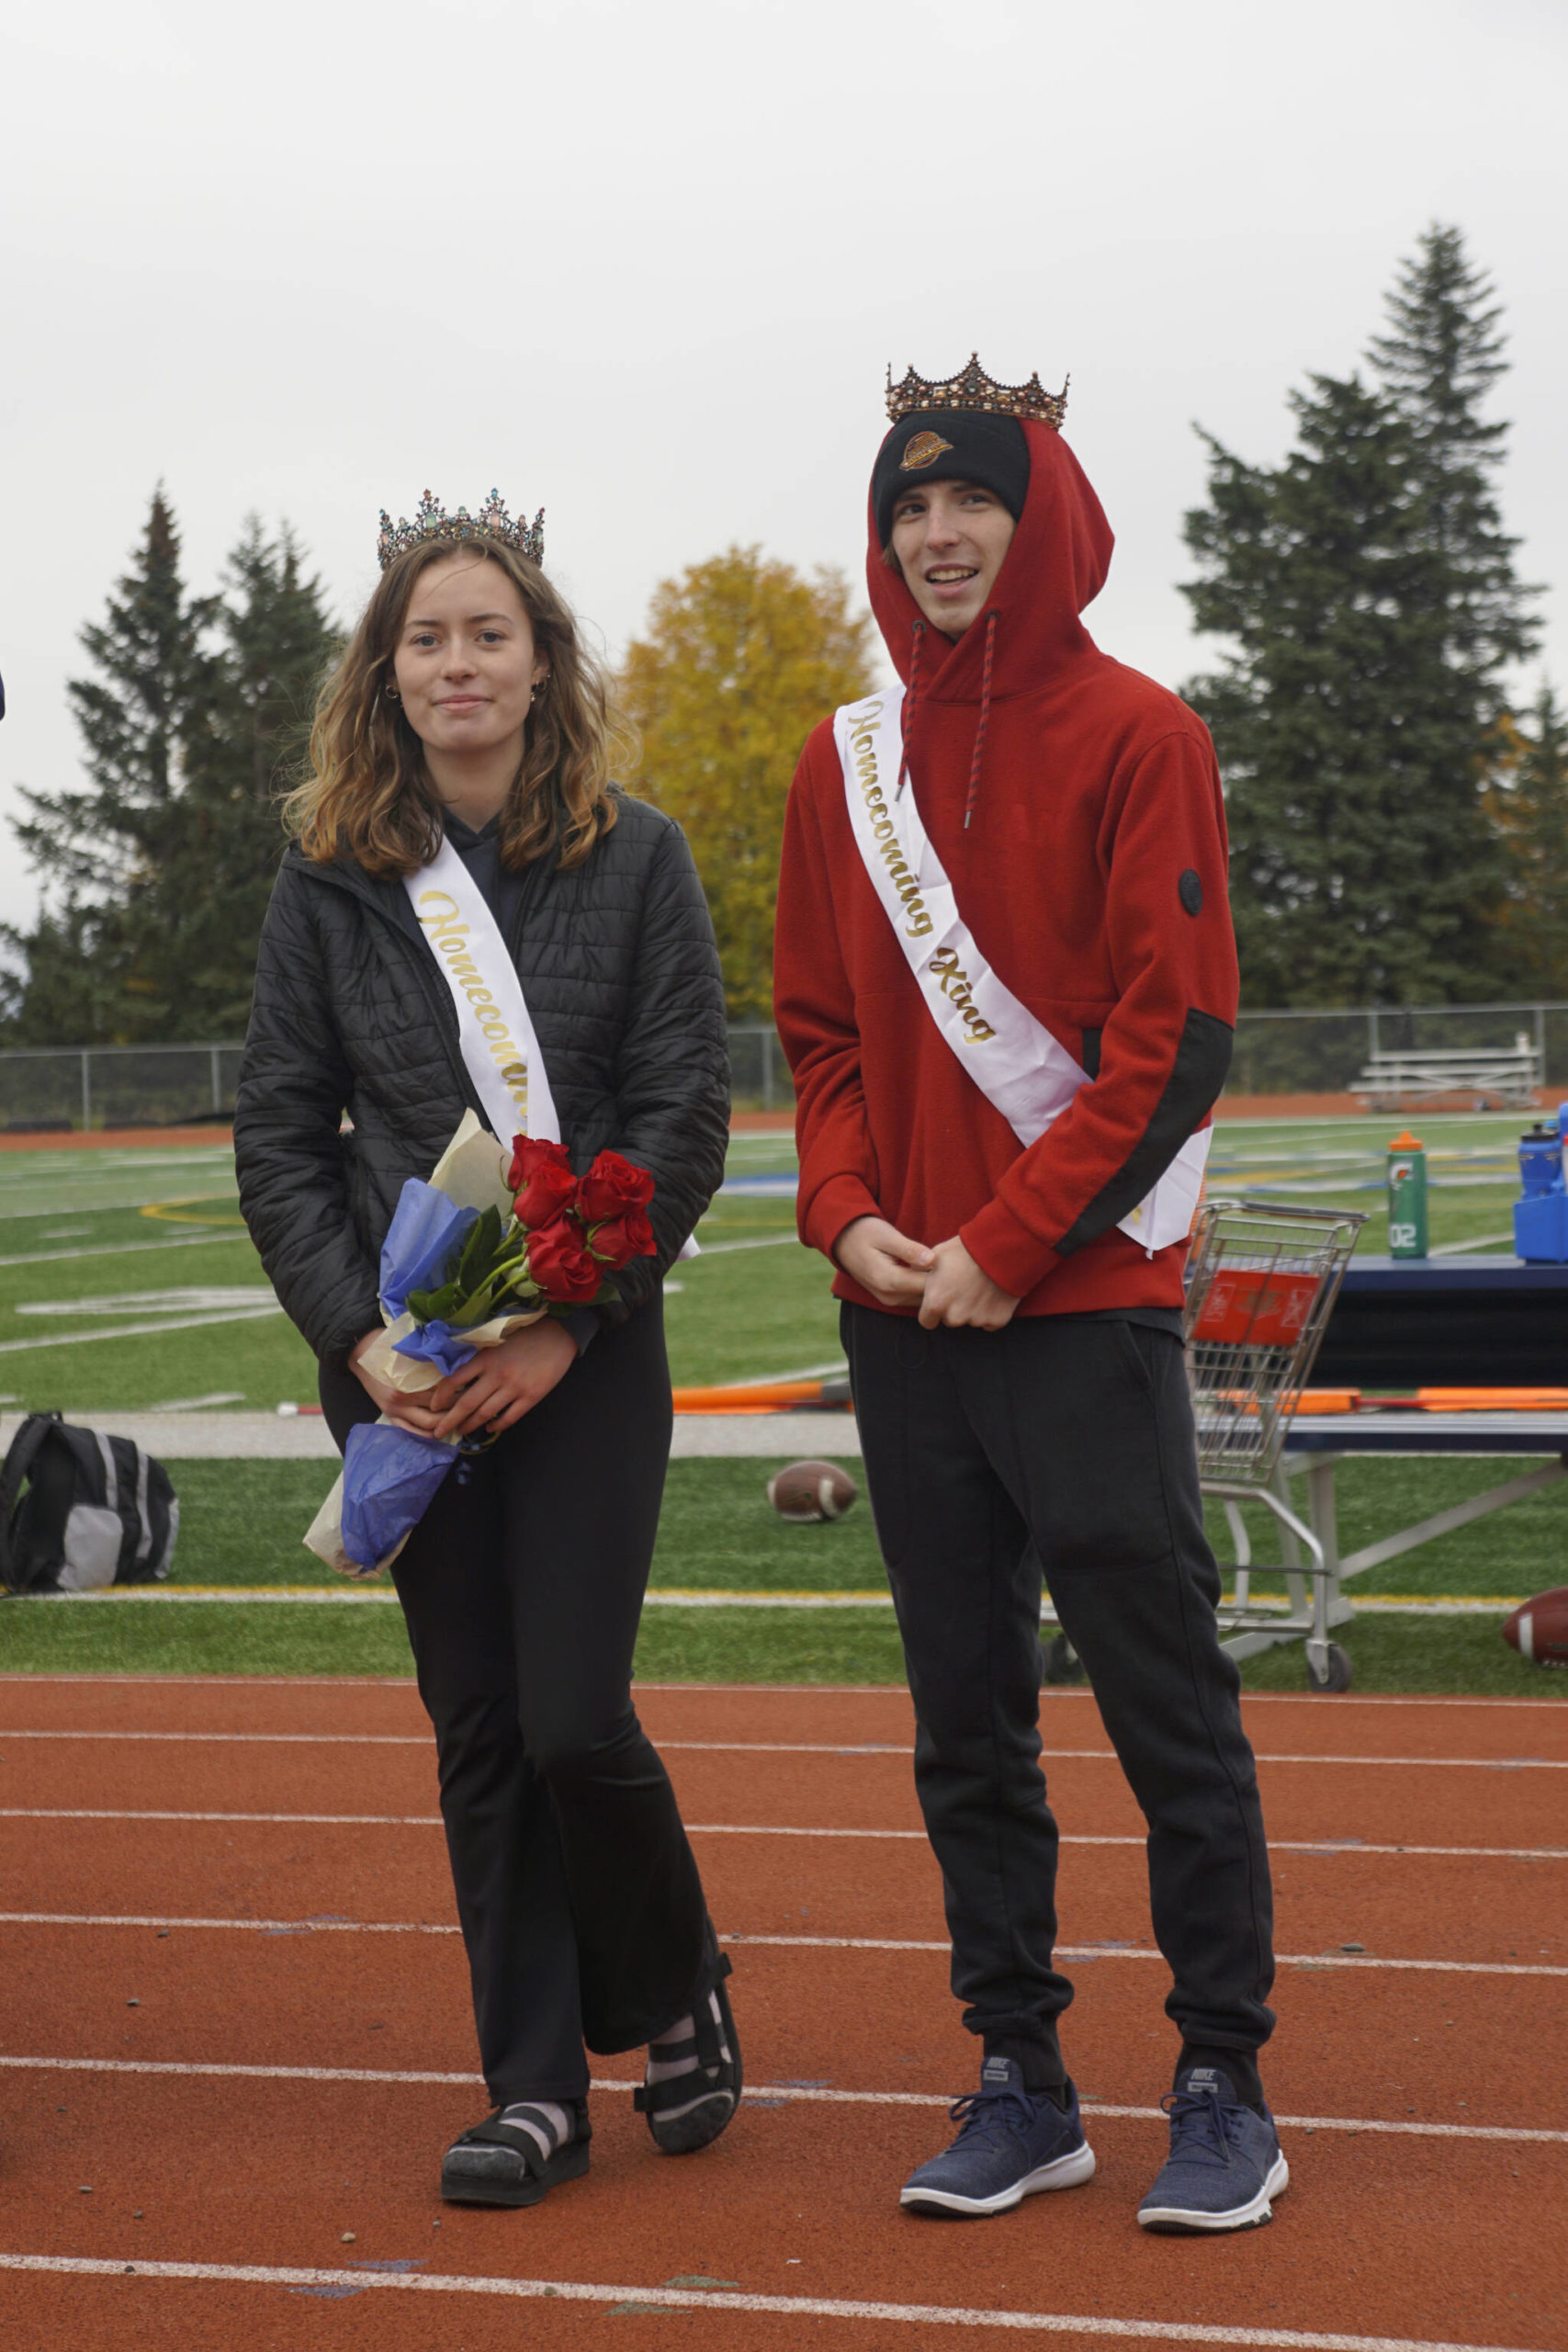 Homecoming Queen Kaylin Anderson, left, and King Kazden Stineff pose after being crowned at the Homer vs. Nikiski junior varsity football game on Saturday, Oct. 2, 2021, at Homer High School. (Photo by Michael Armstrong/Homer News)